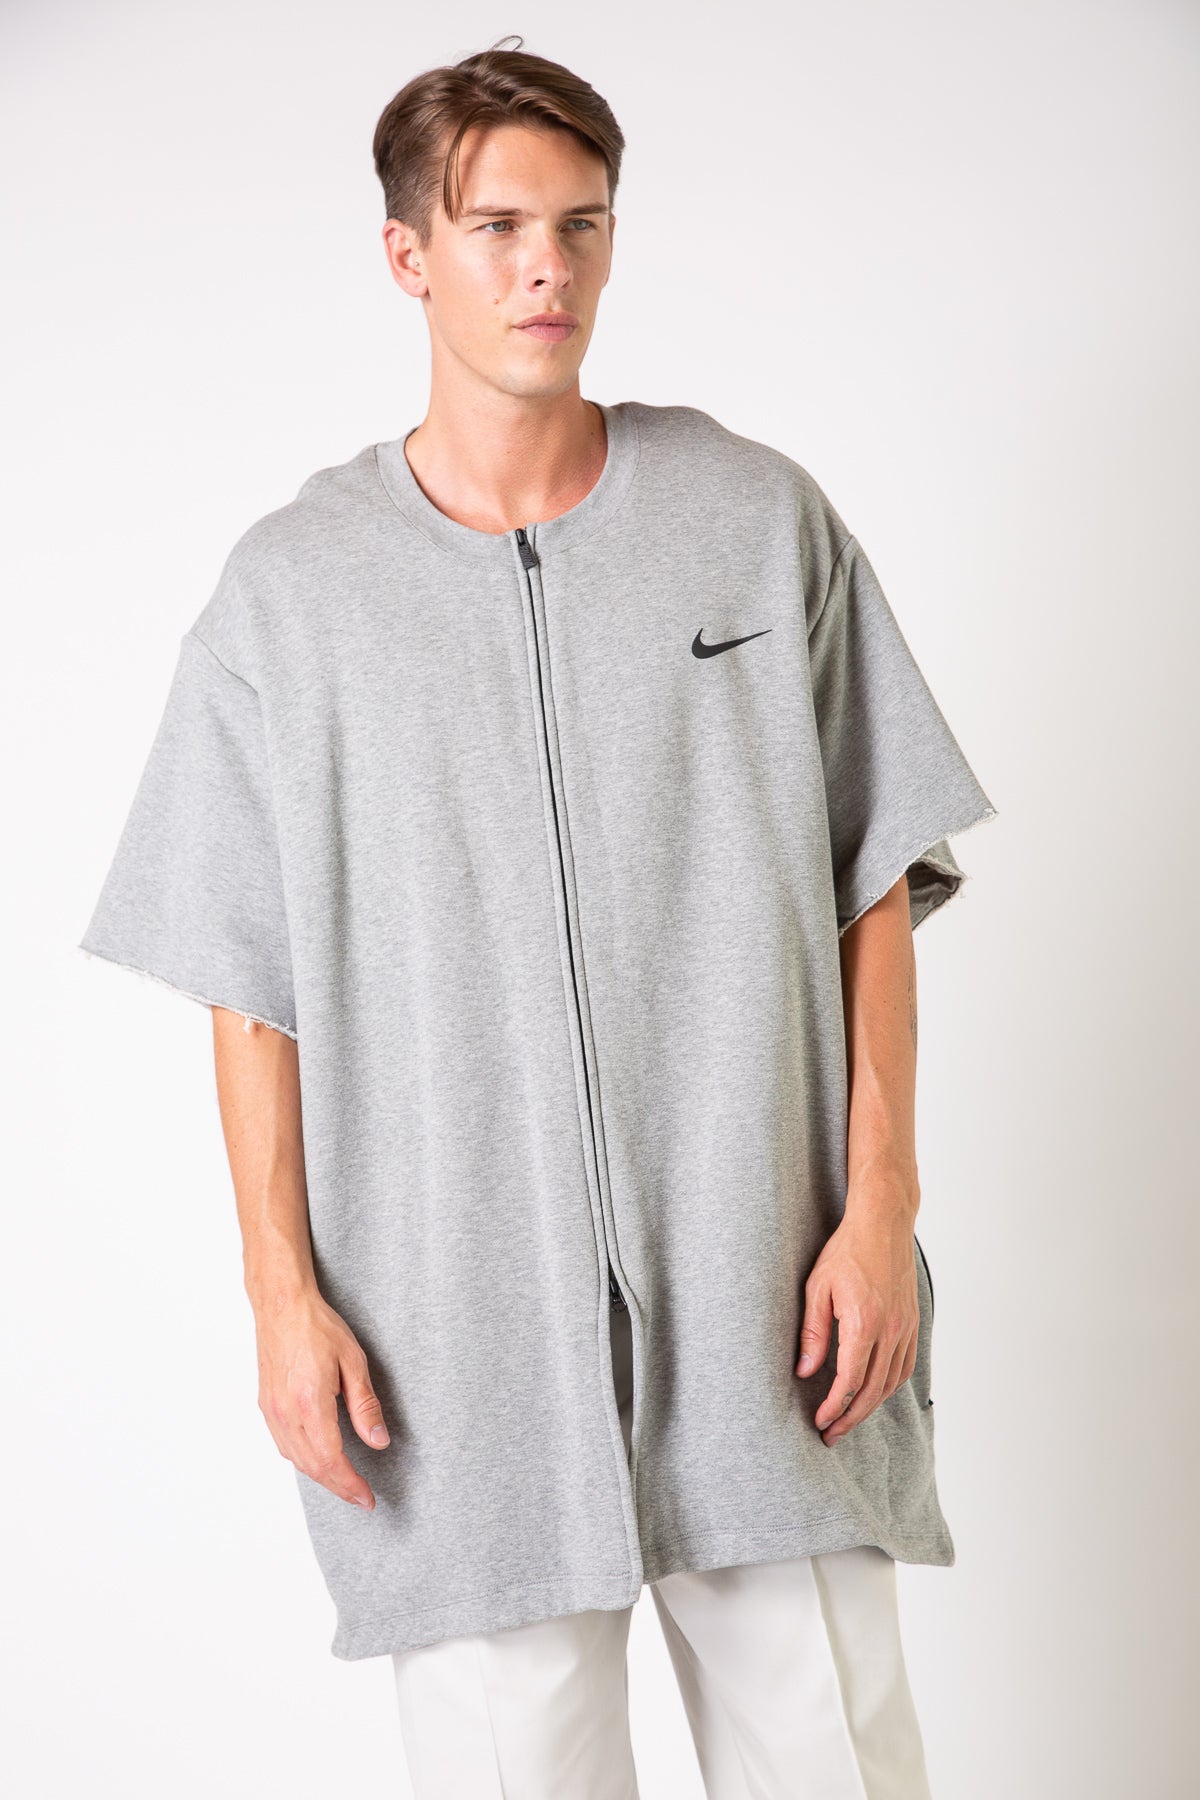 NIKE × FEAR OF GOD WARM UP TOP